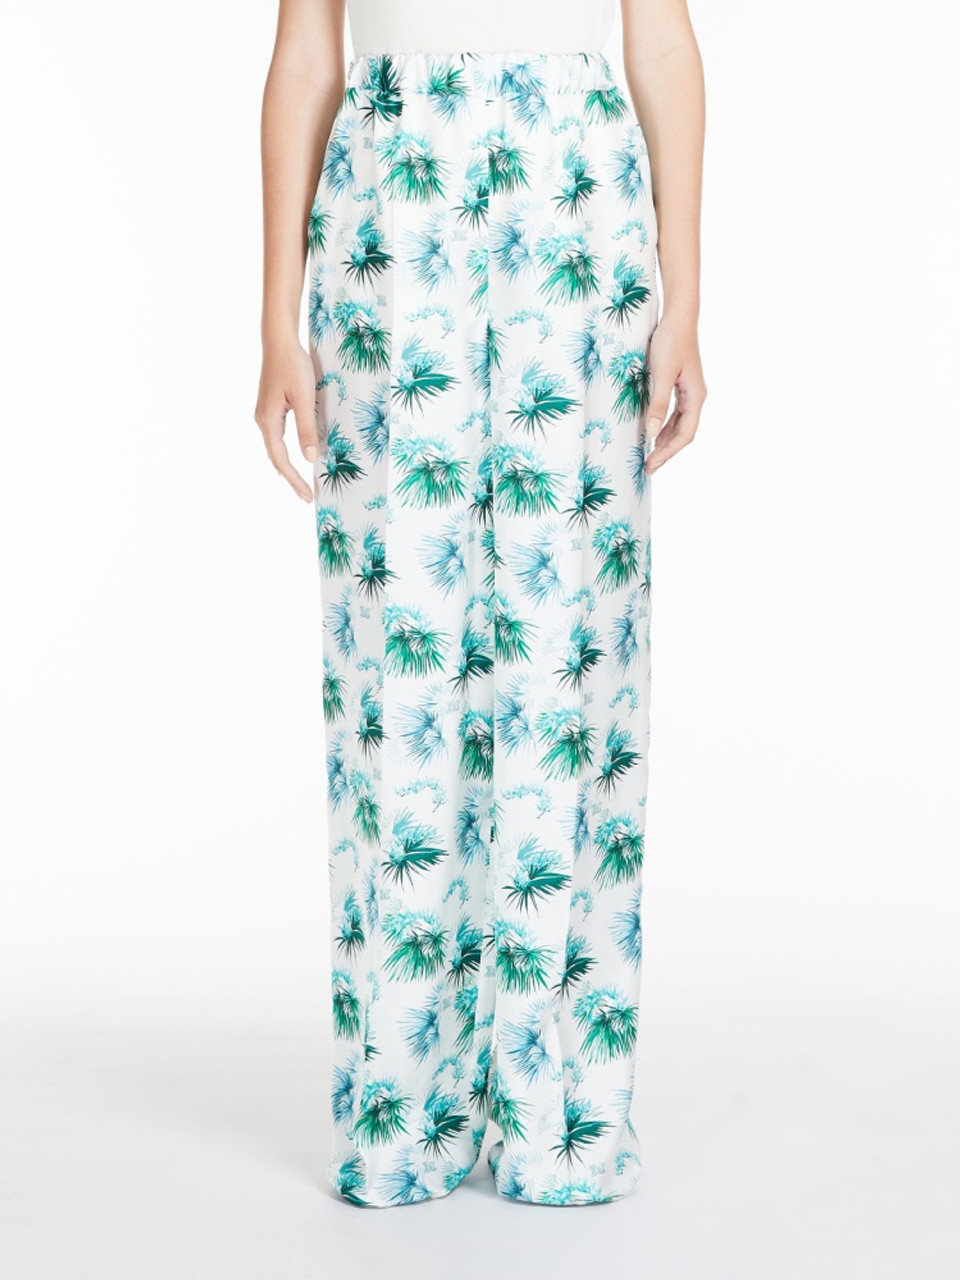 Max Mara Umile Printed Silk Trousers in Turquoise